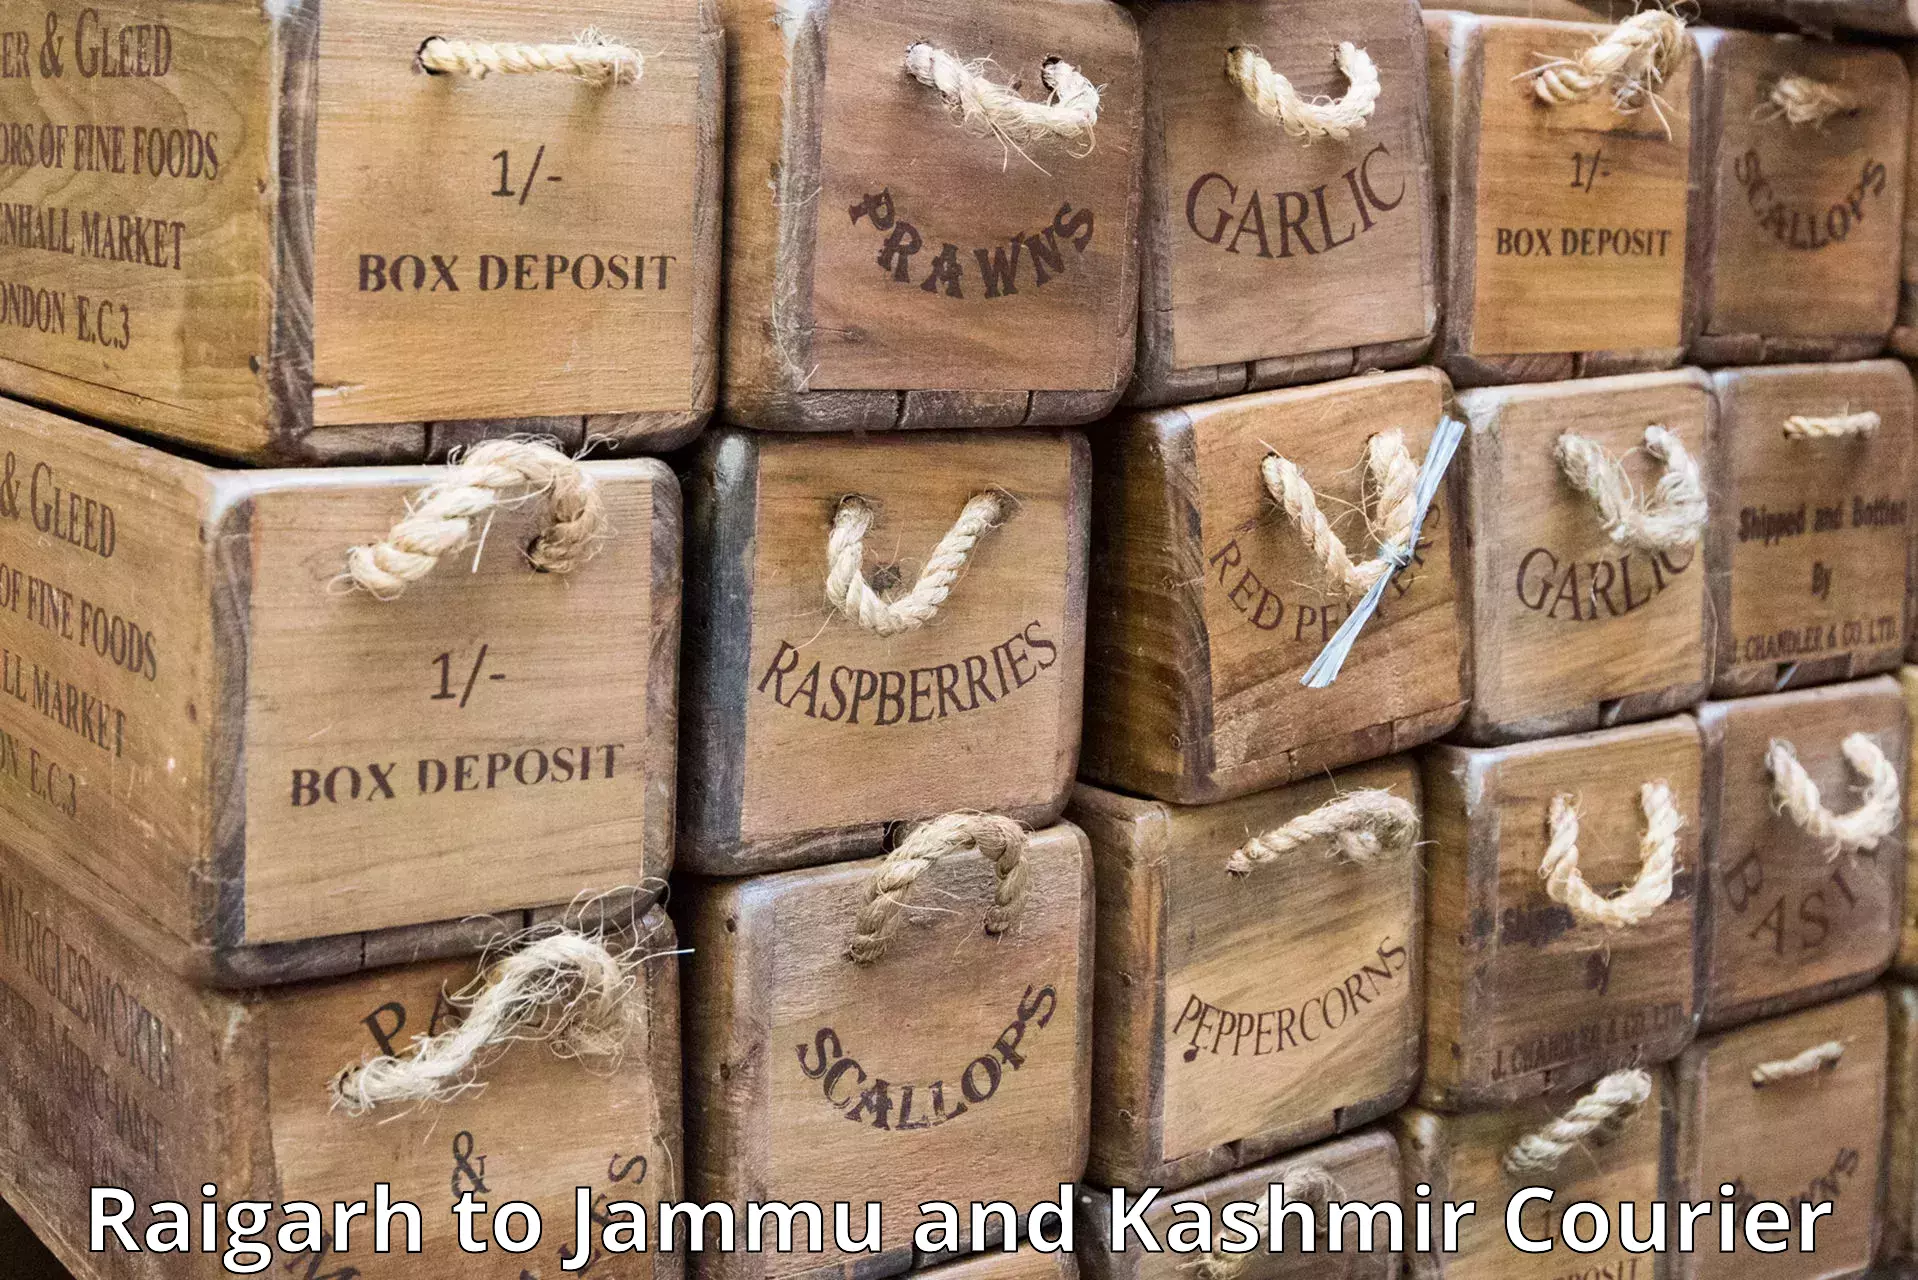 State-of-the-art courier technology Raigarh to Pulwama